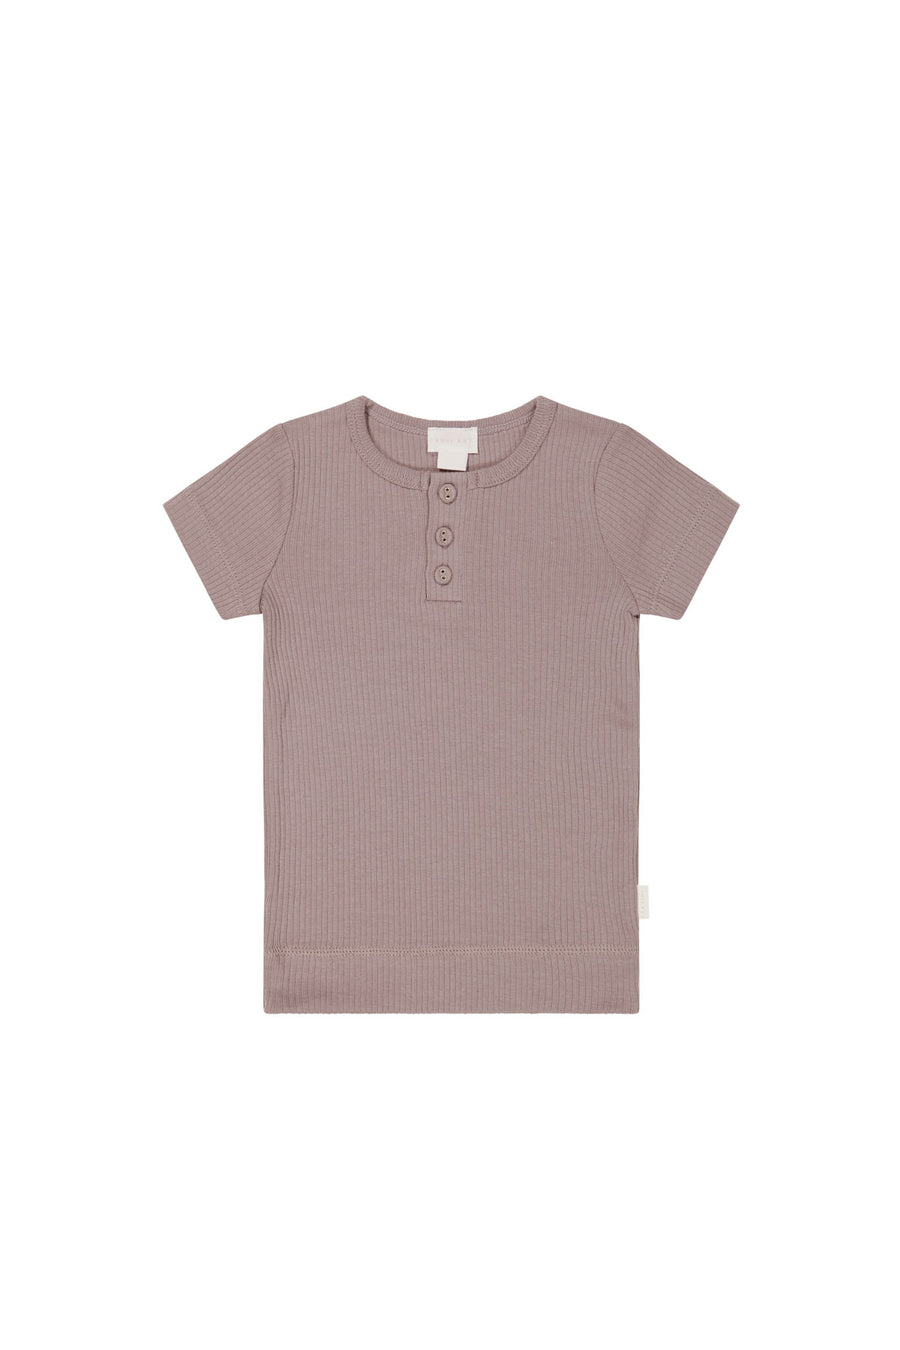 Organic Cotton Modal Henley Tee - Mauve Shadow Childrens Top from Jamie Kay NZ